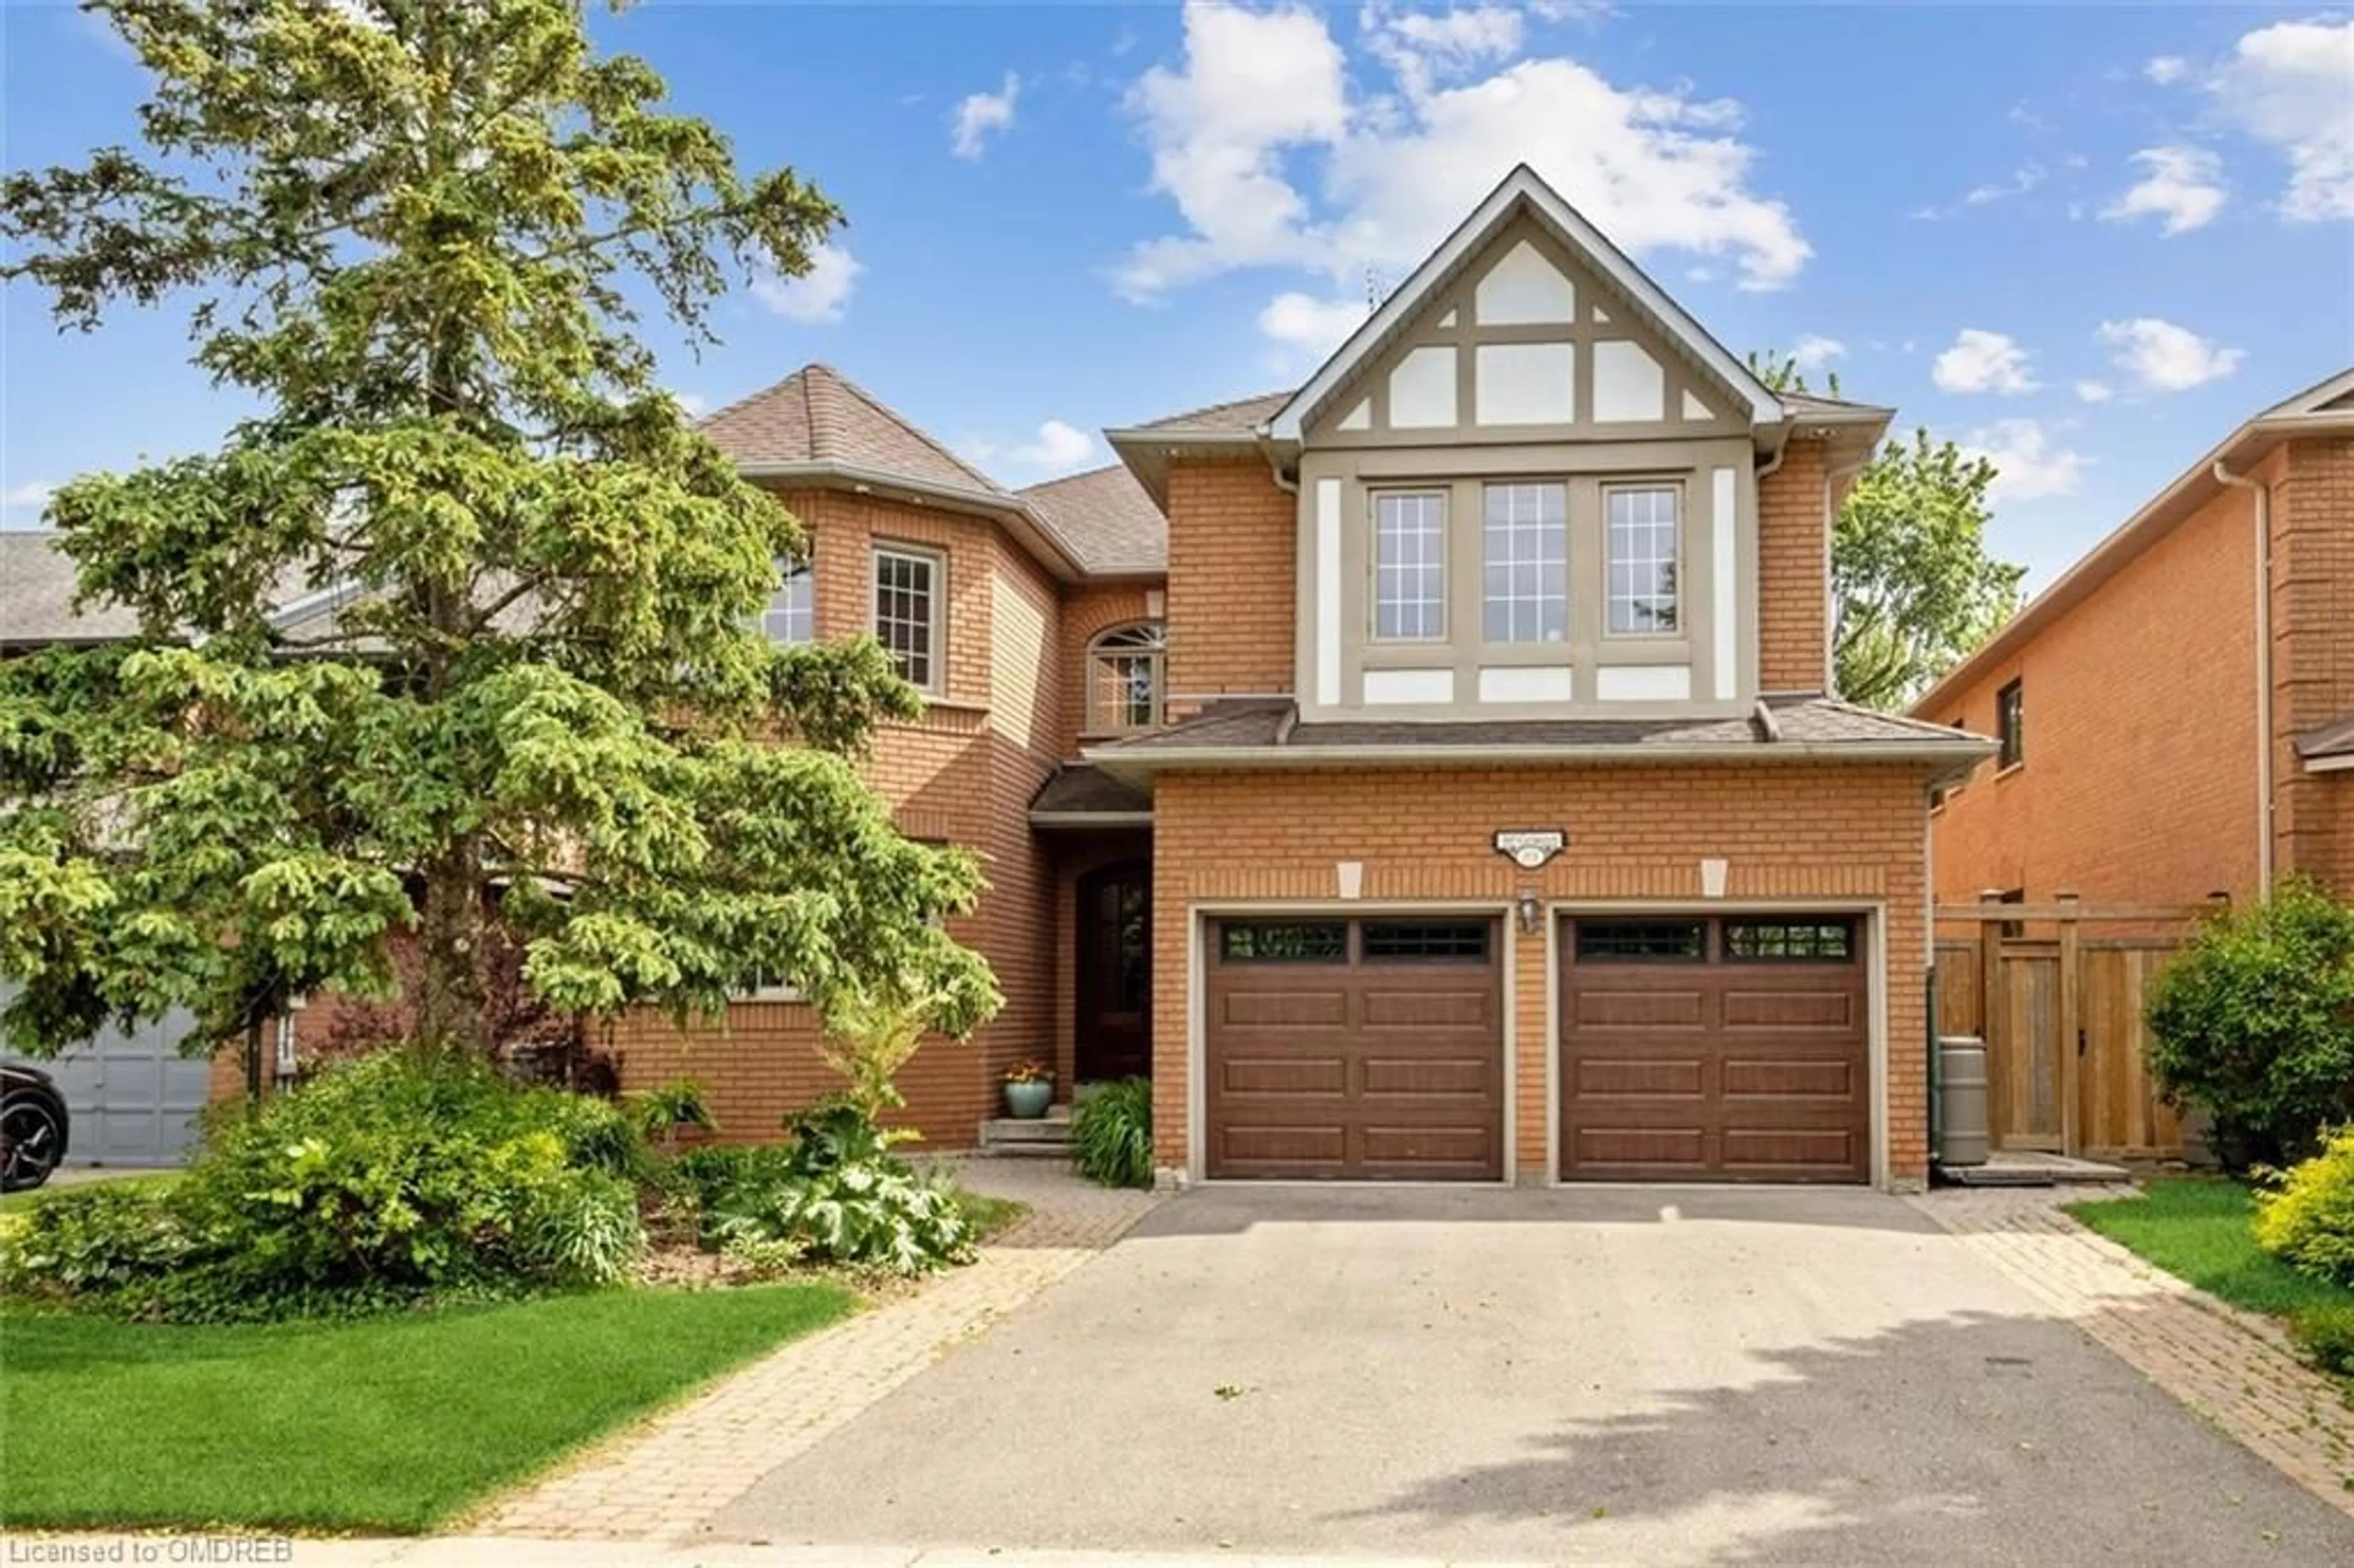 Home with brick exterior material for 391 March Cres, Oakville Ontario L6H 5X7